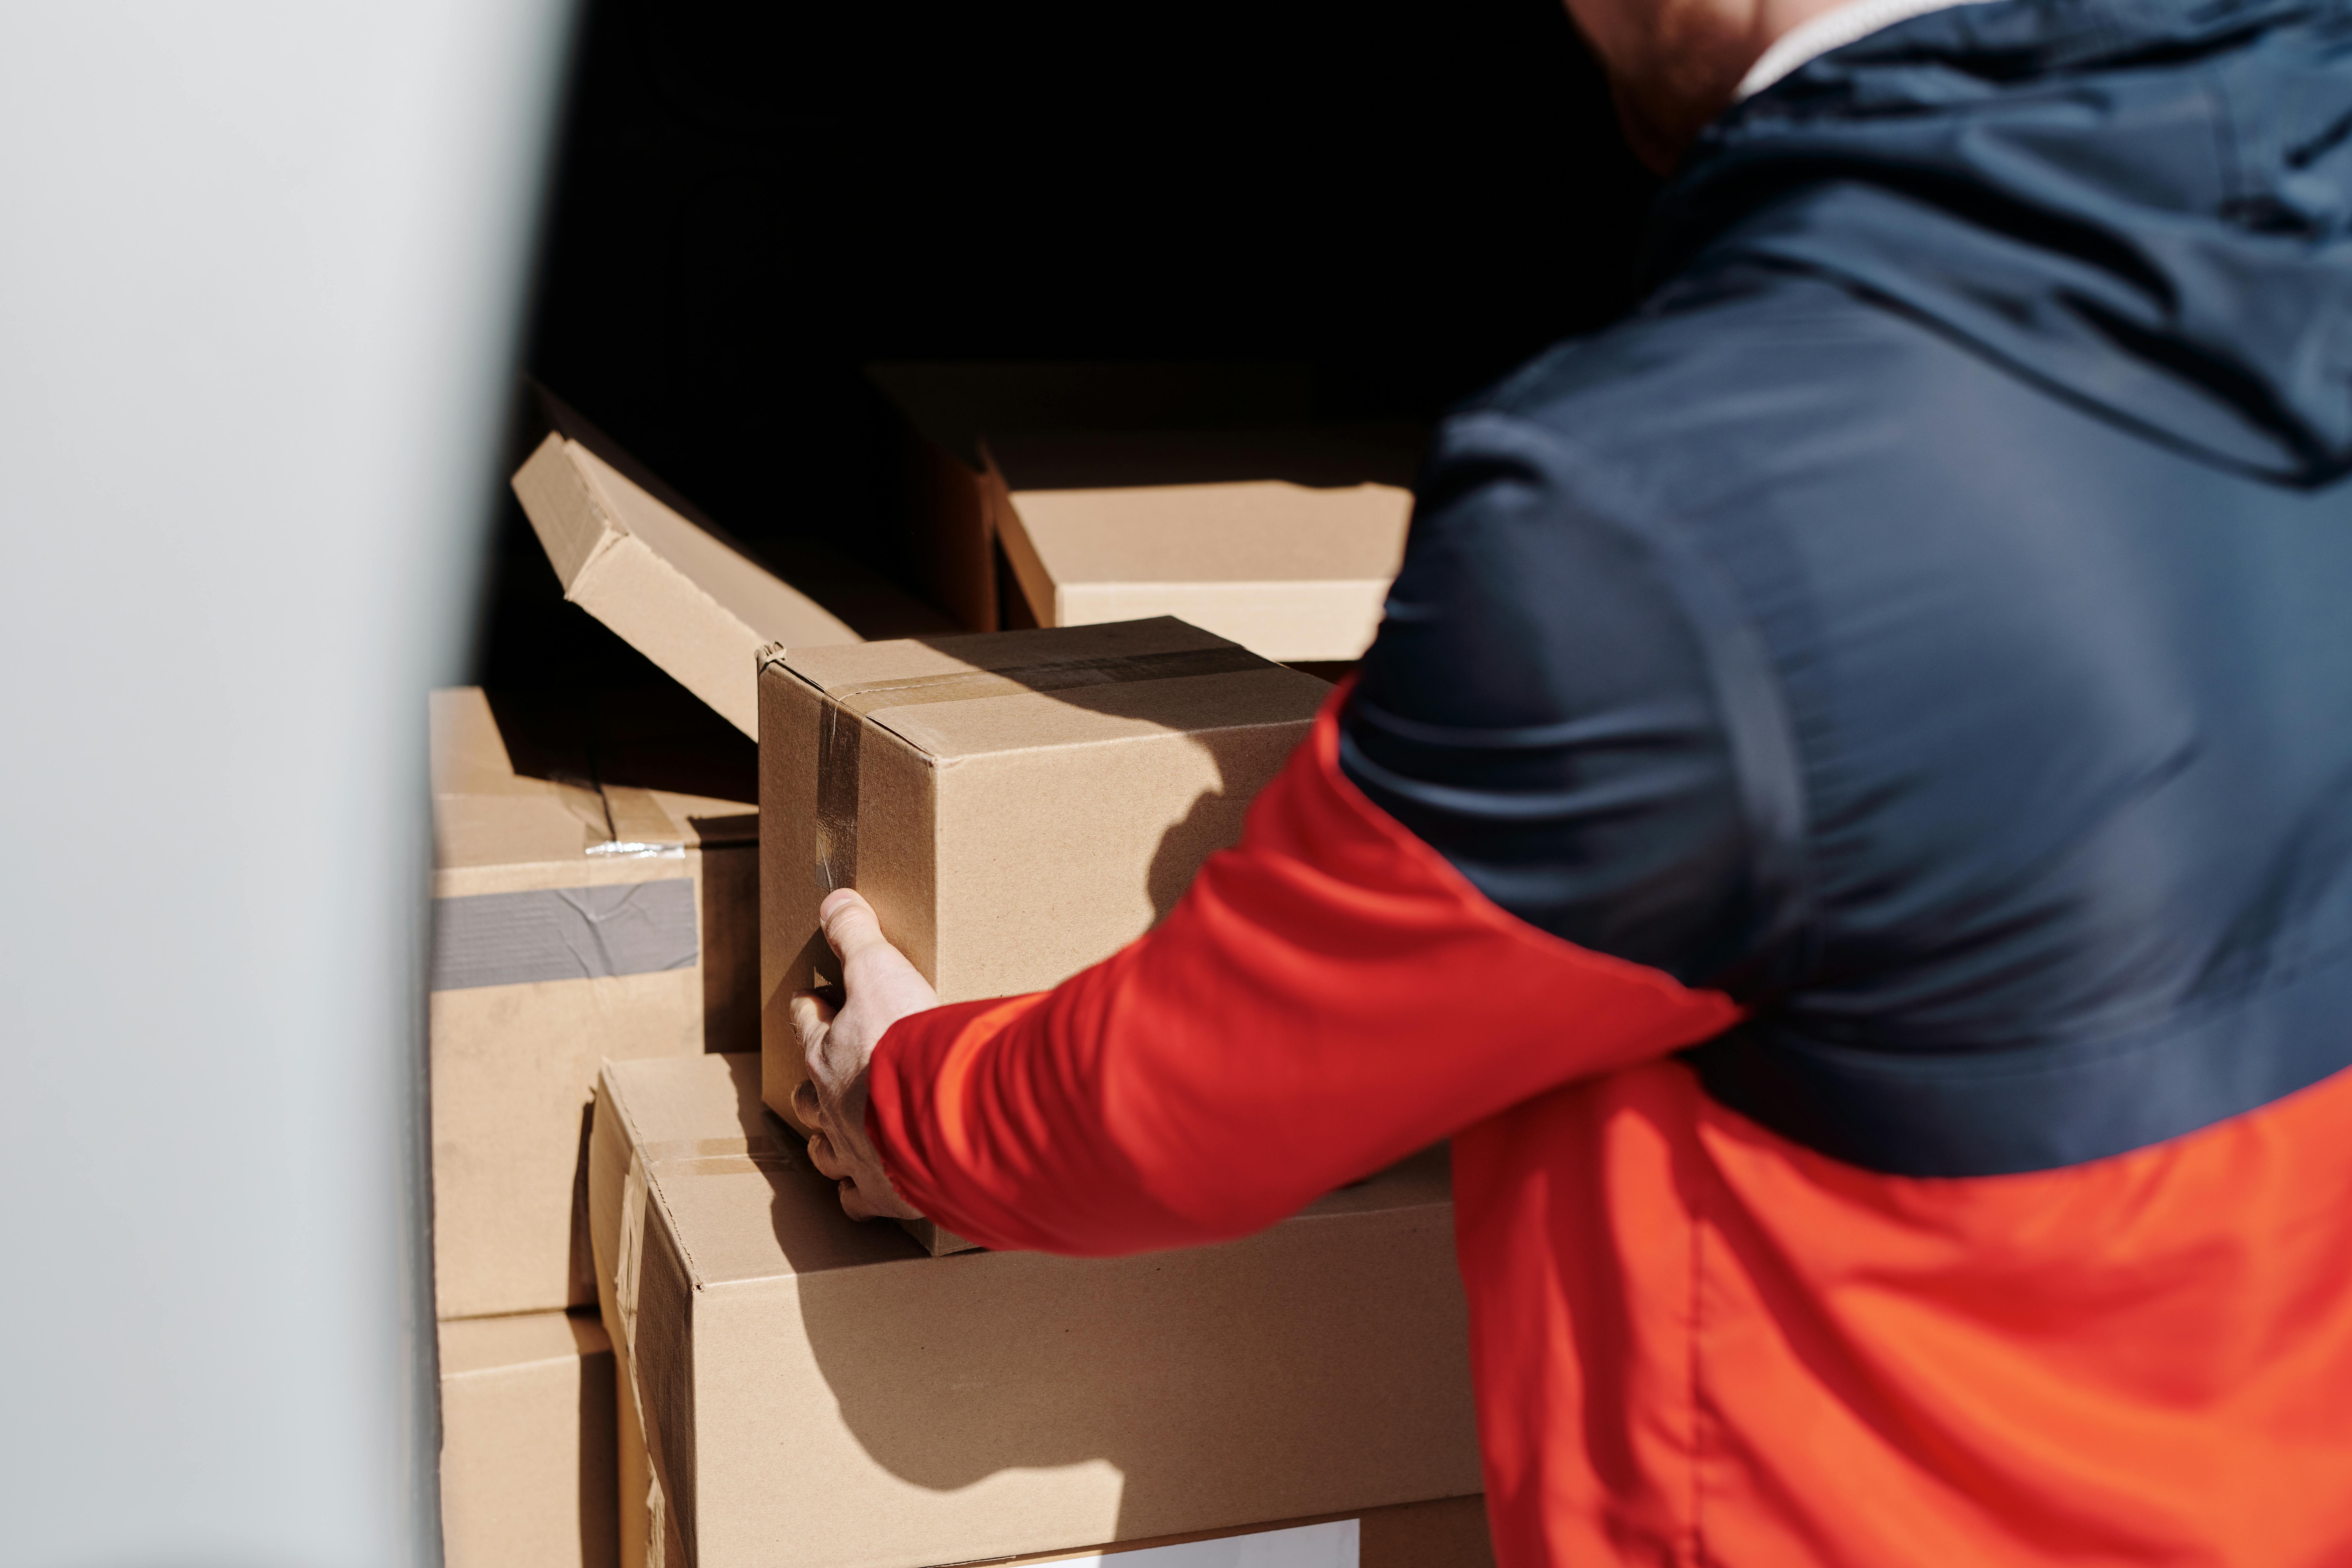 A person holding a cardboard box | Source: Pexels